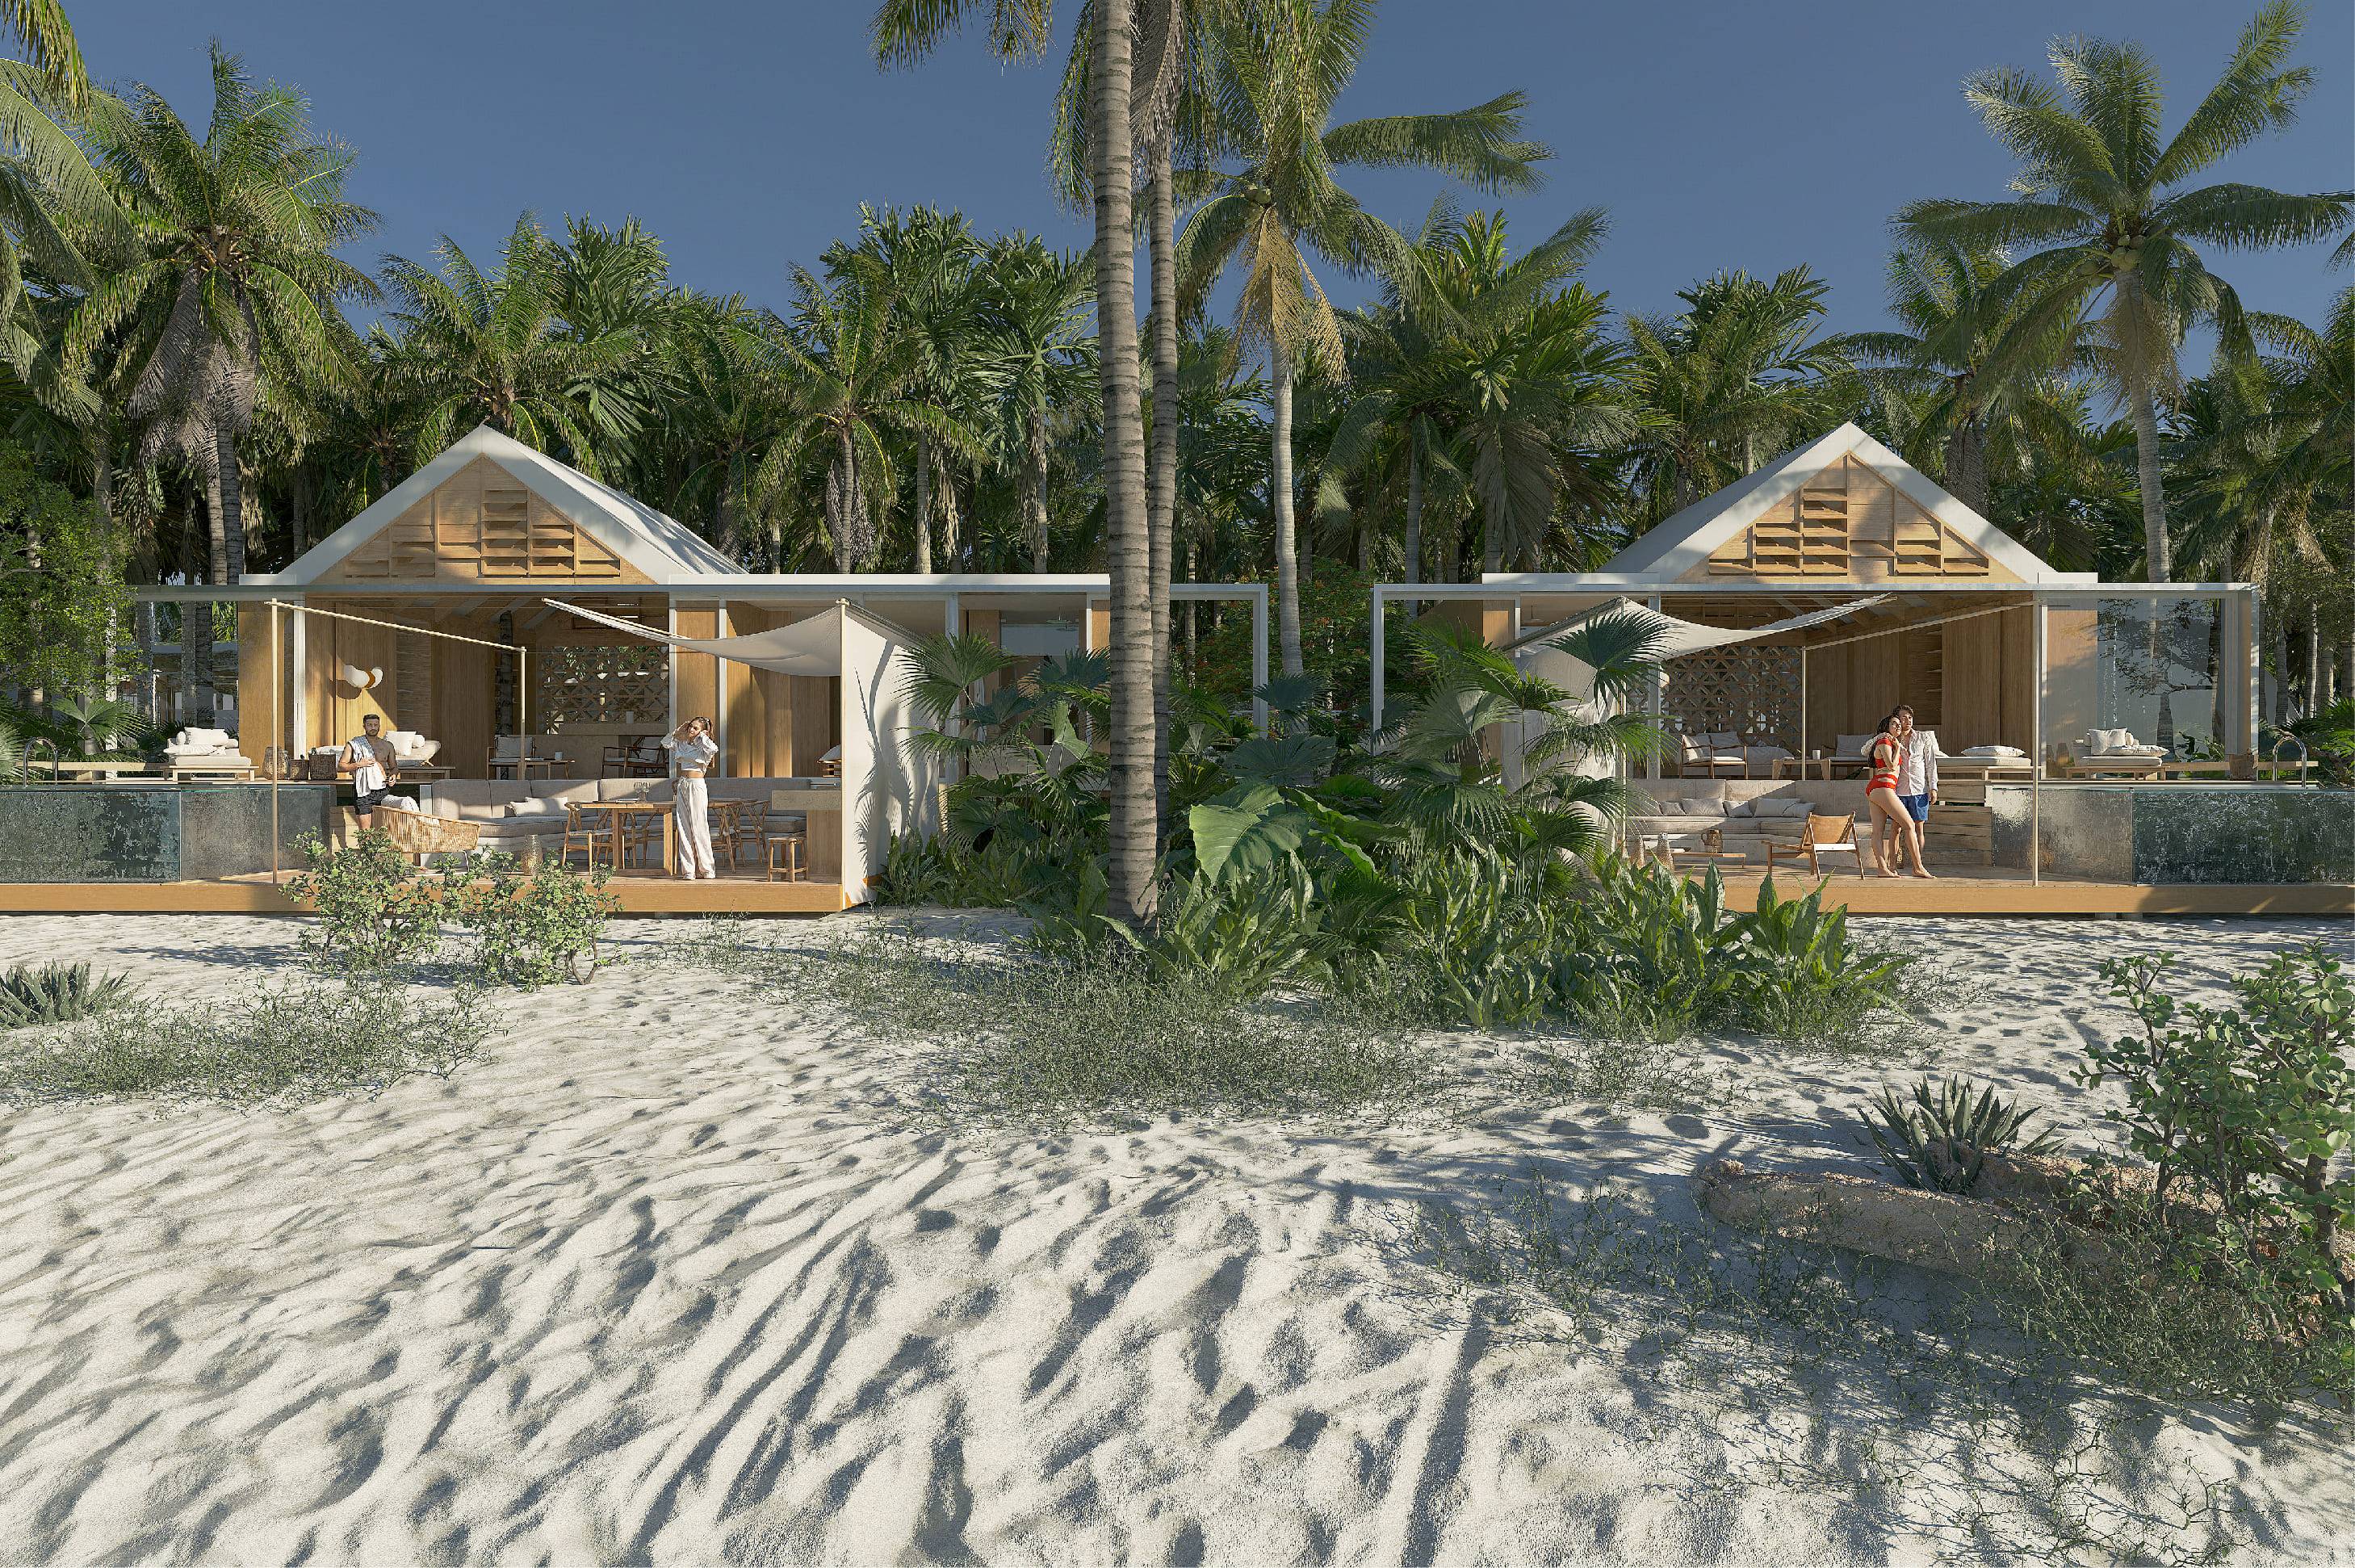 DELUXE TWO BEDROOM VILLA at the first dedicated 5-Star Residence Resort in the Maldives